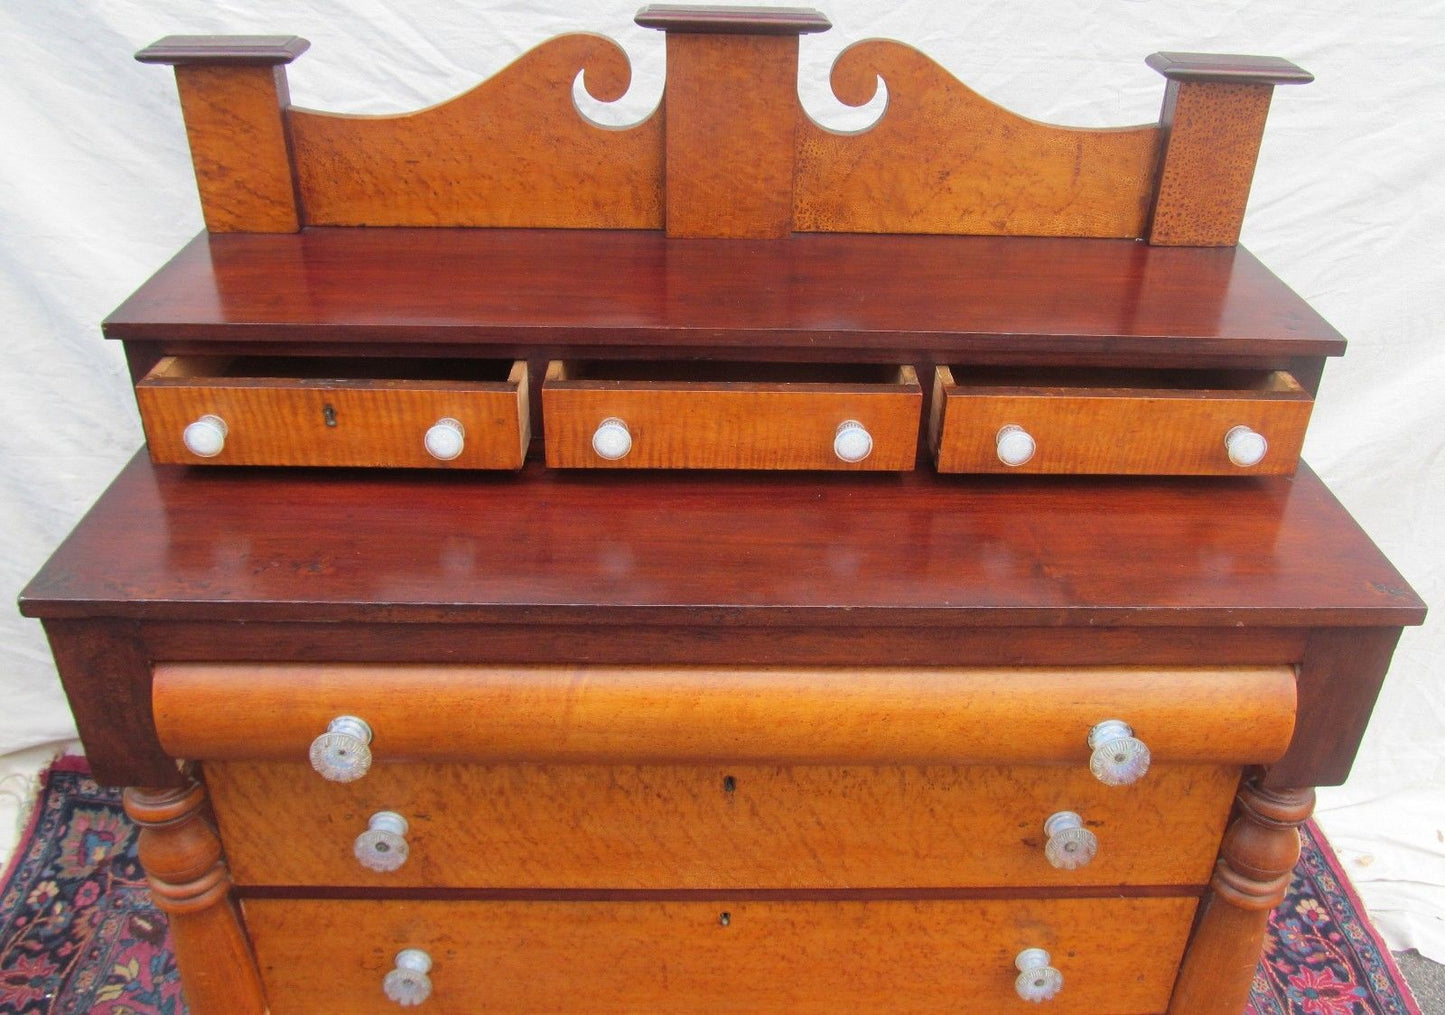 SHERATON BIRD'S EYE MAPLE & MAHOGANY CHEST OF DRAWERS WITH SANDWICH GLASS KNOBS